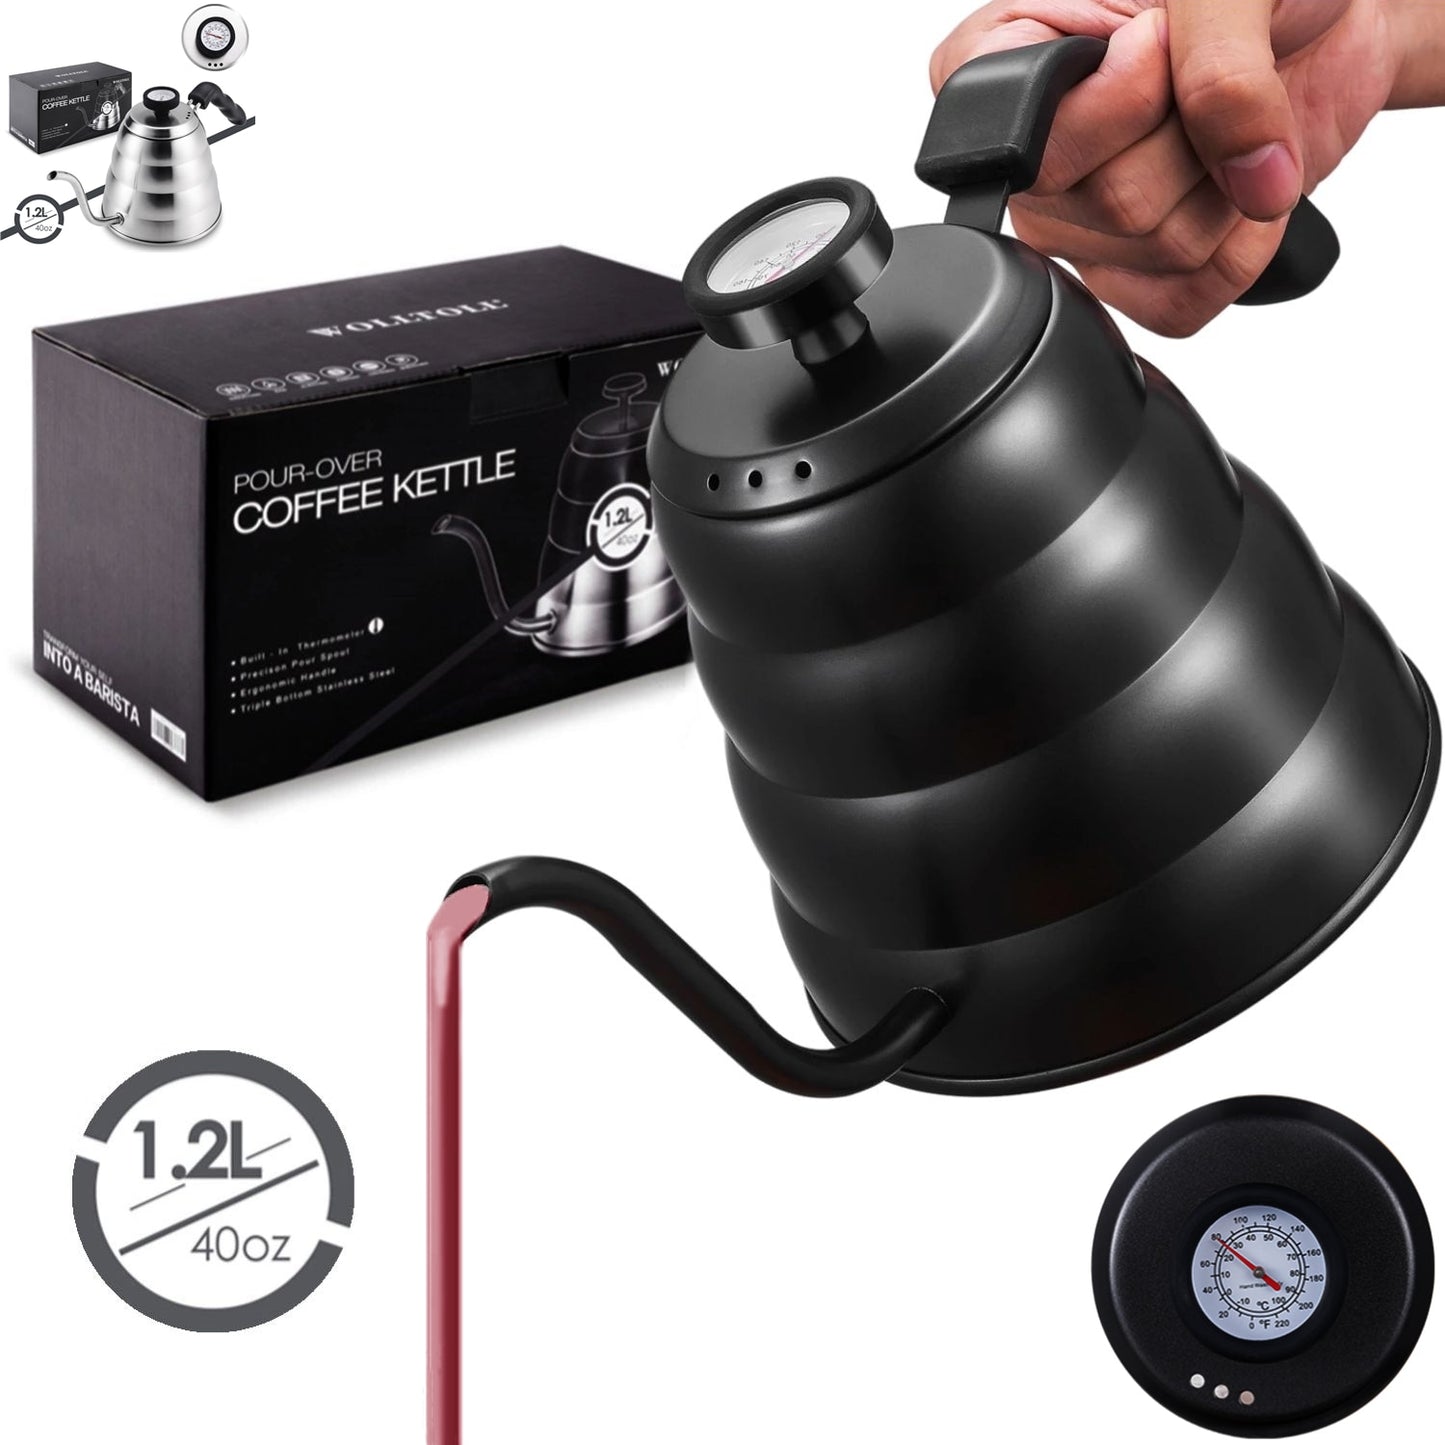 40oz/1.2L Stainless Steel Coffee Kettle with Thermometer, Gooseneck Thin Spout for Hand Drip Pour Over Coffee Tea Pot Teapot